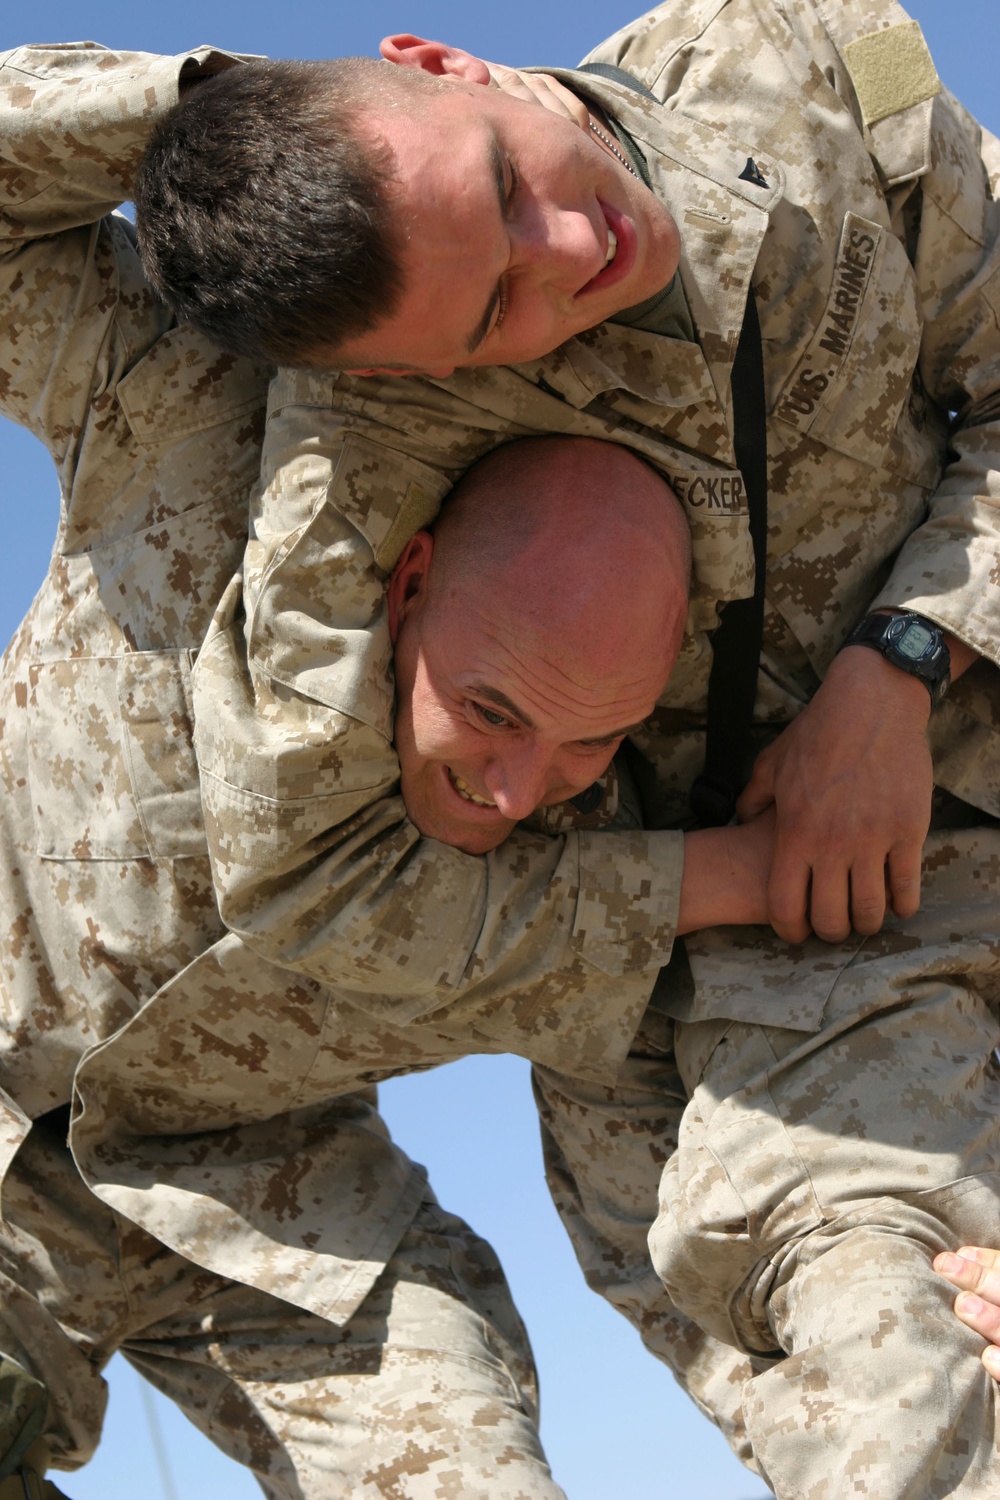 Cpl. Kyle Becker puts his older brother in a headlock